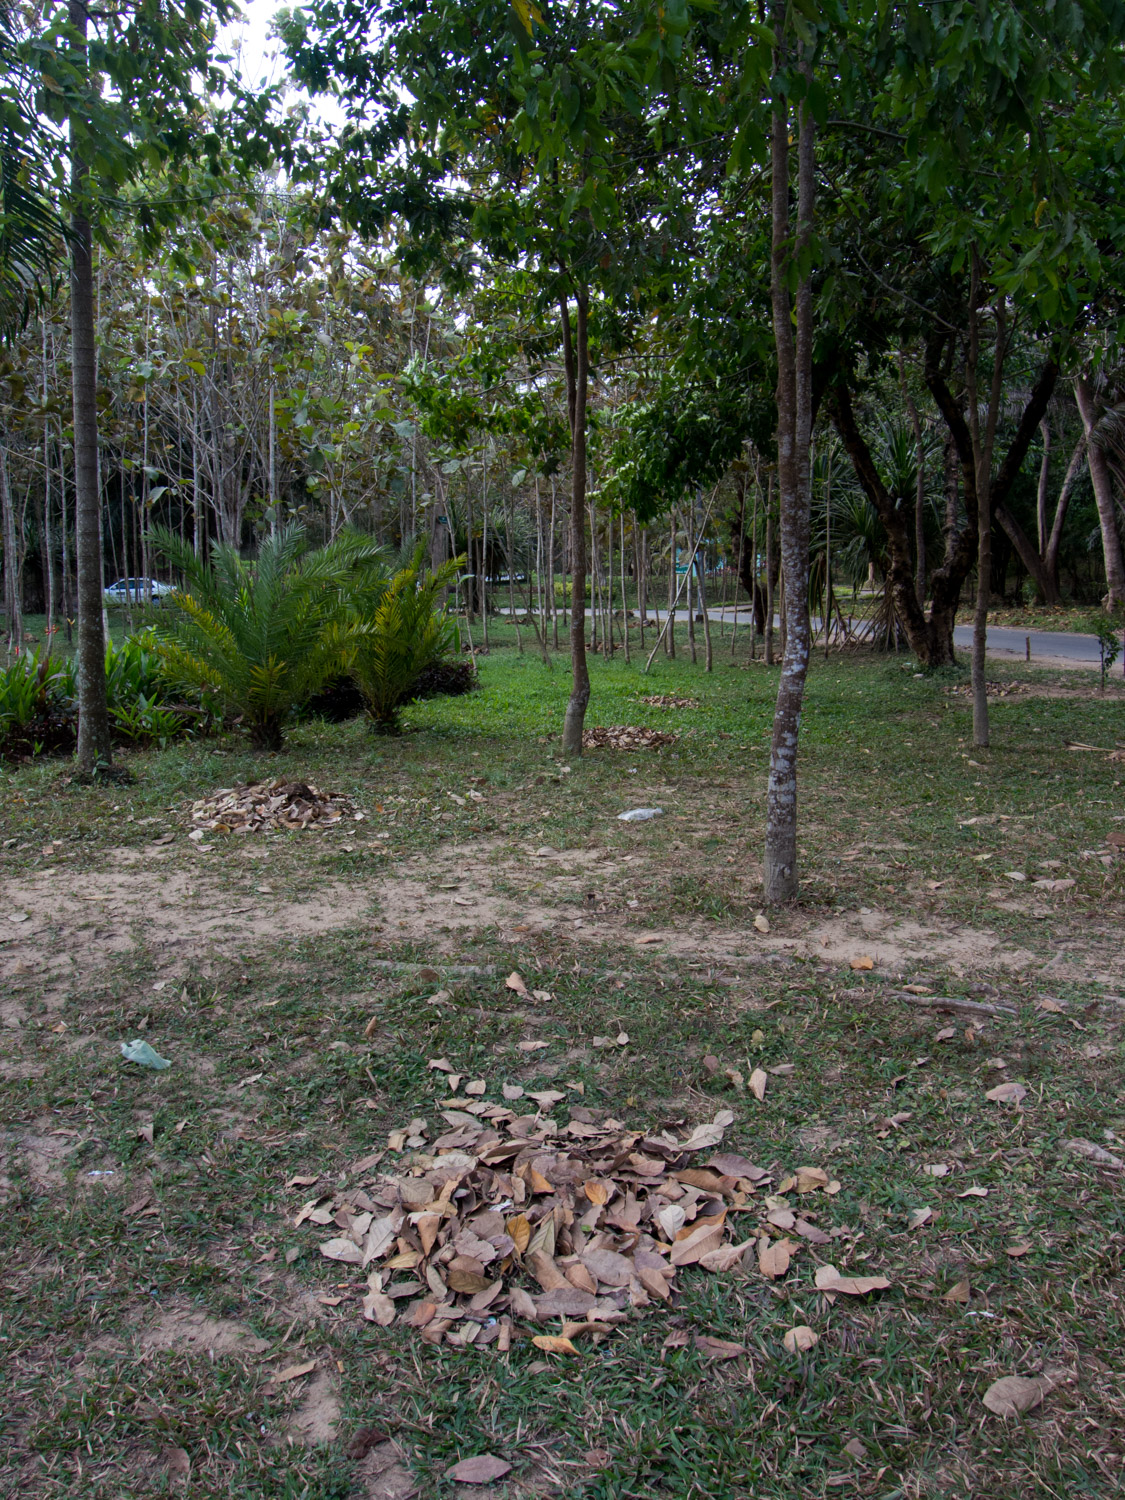 Yes, those piles of leaves do mean that people are sweeping the grass. Yangon - where cheap labour is really cheap.